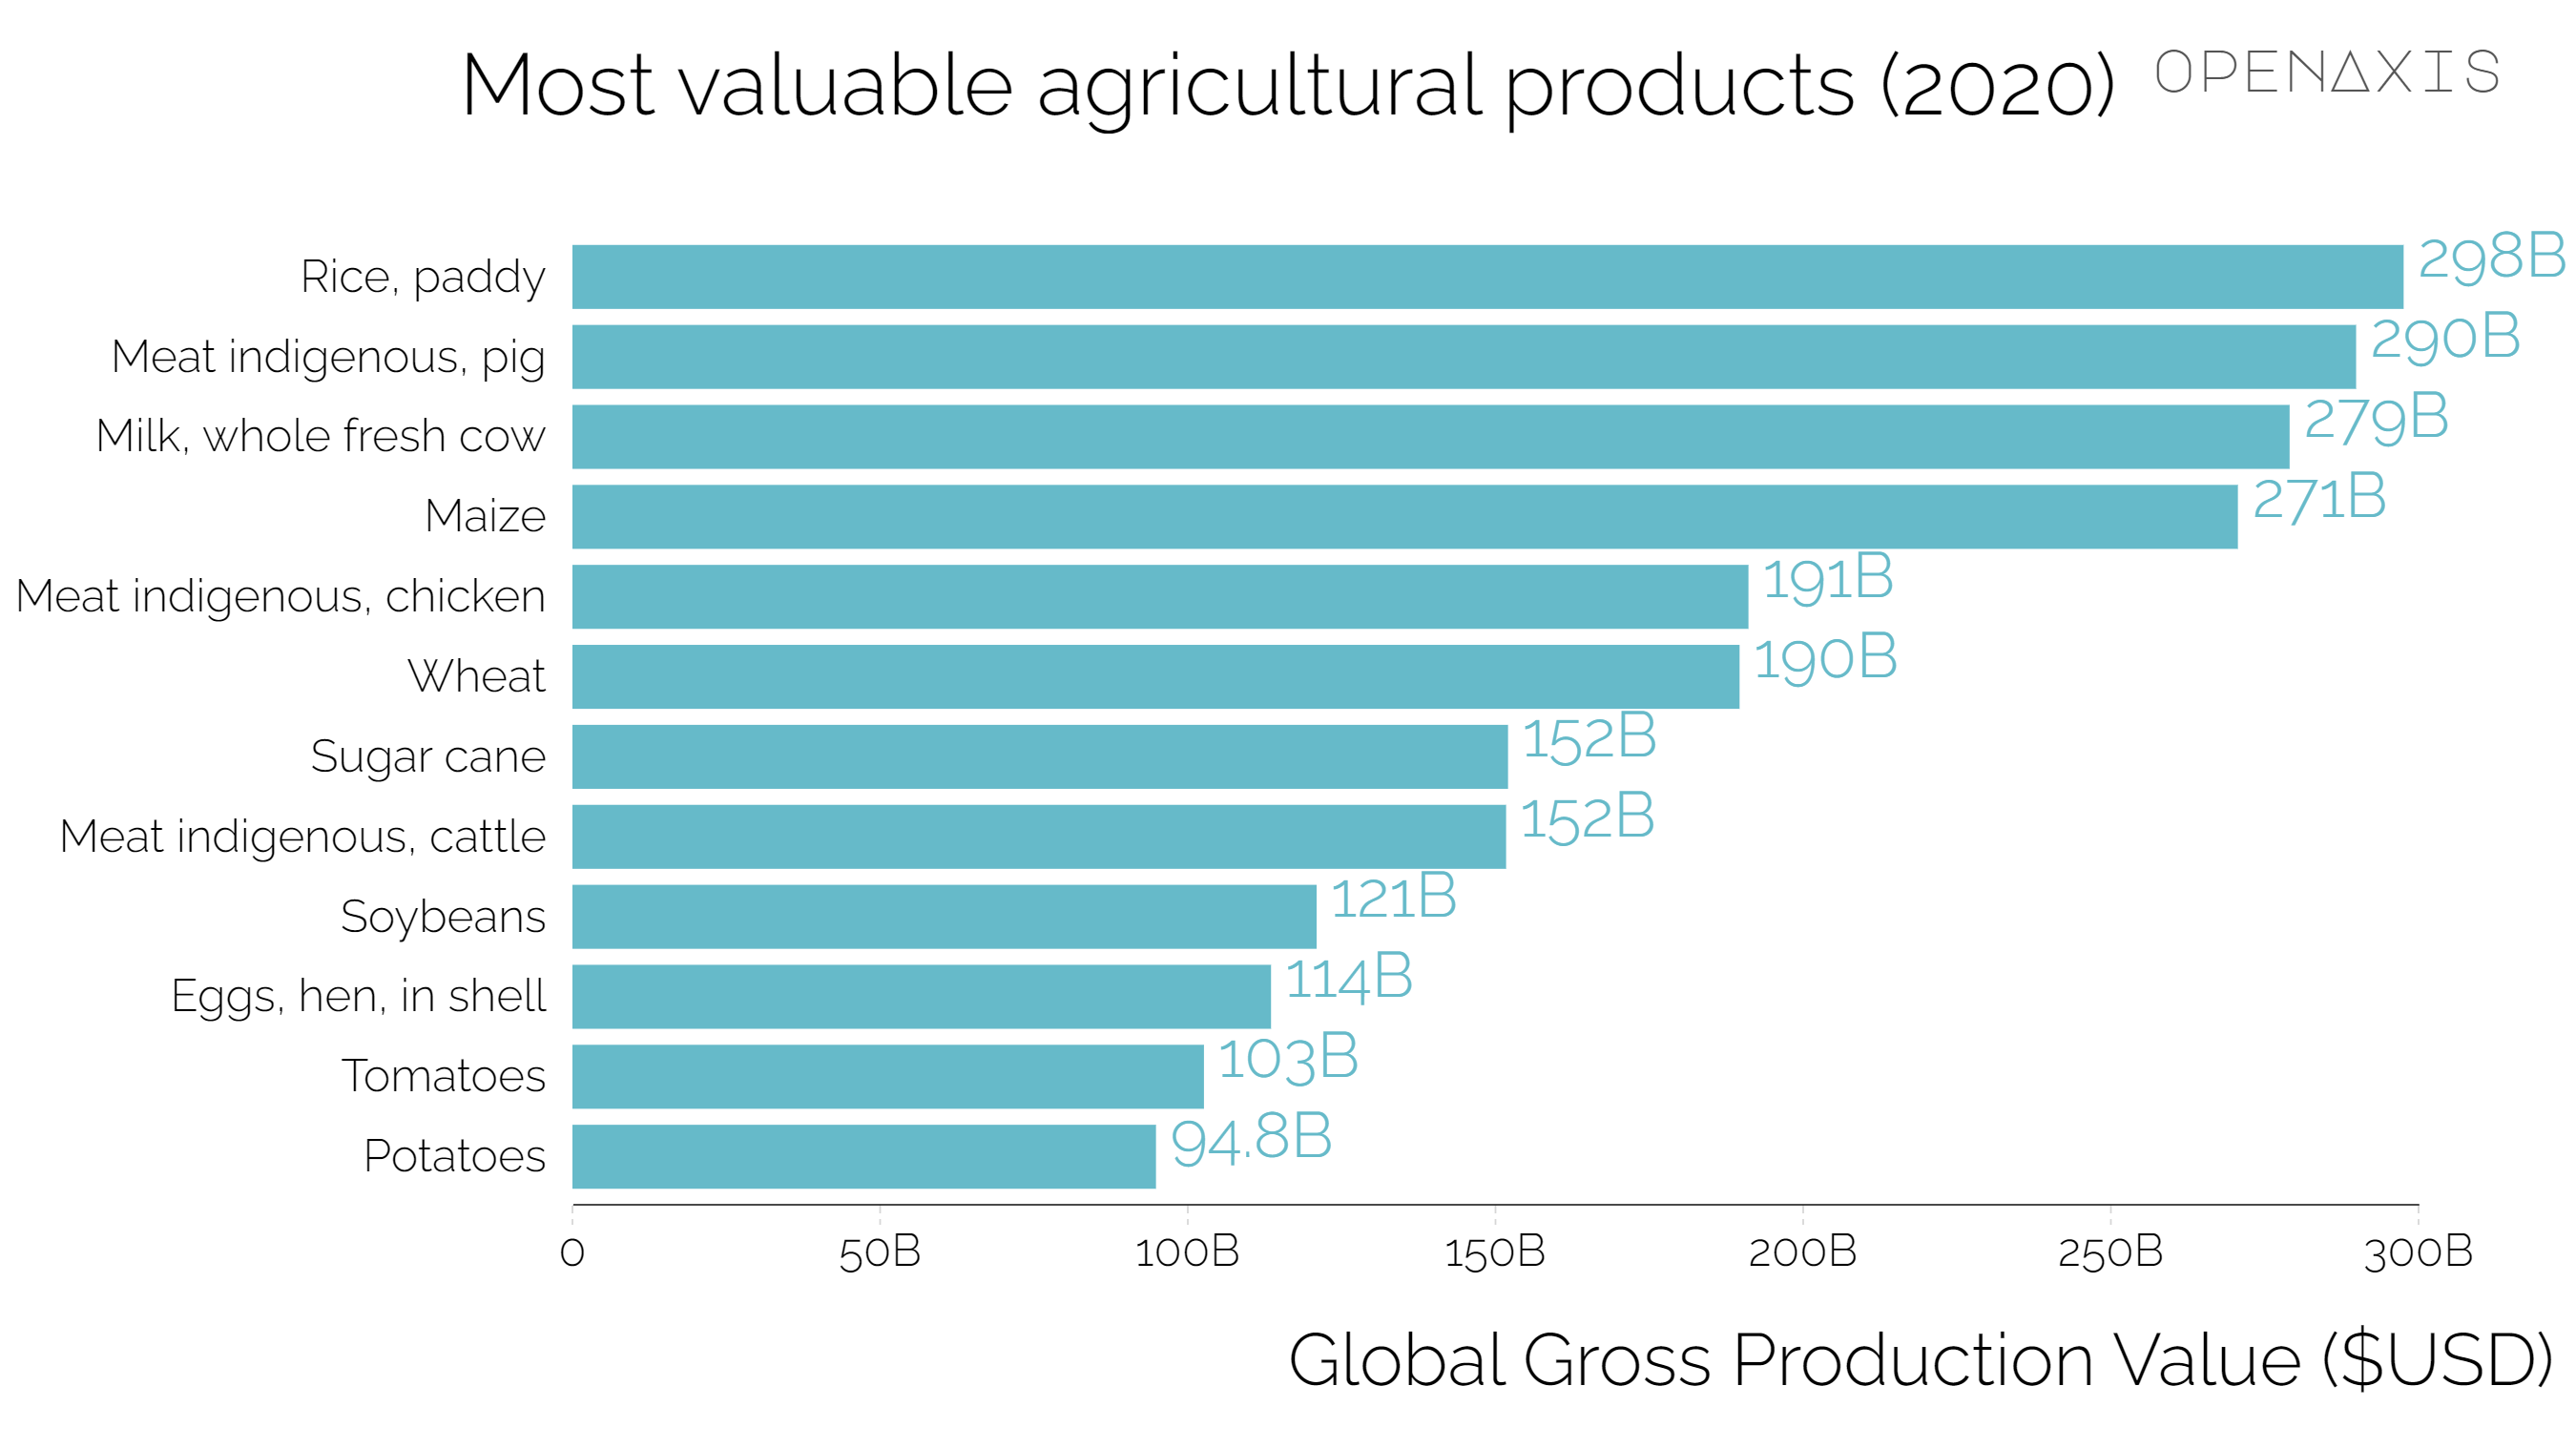 "Most valuable agricultural products (2020)"